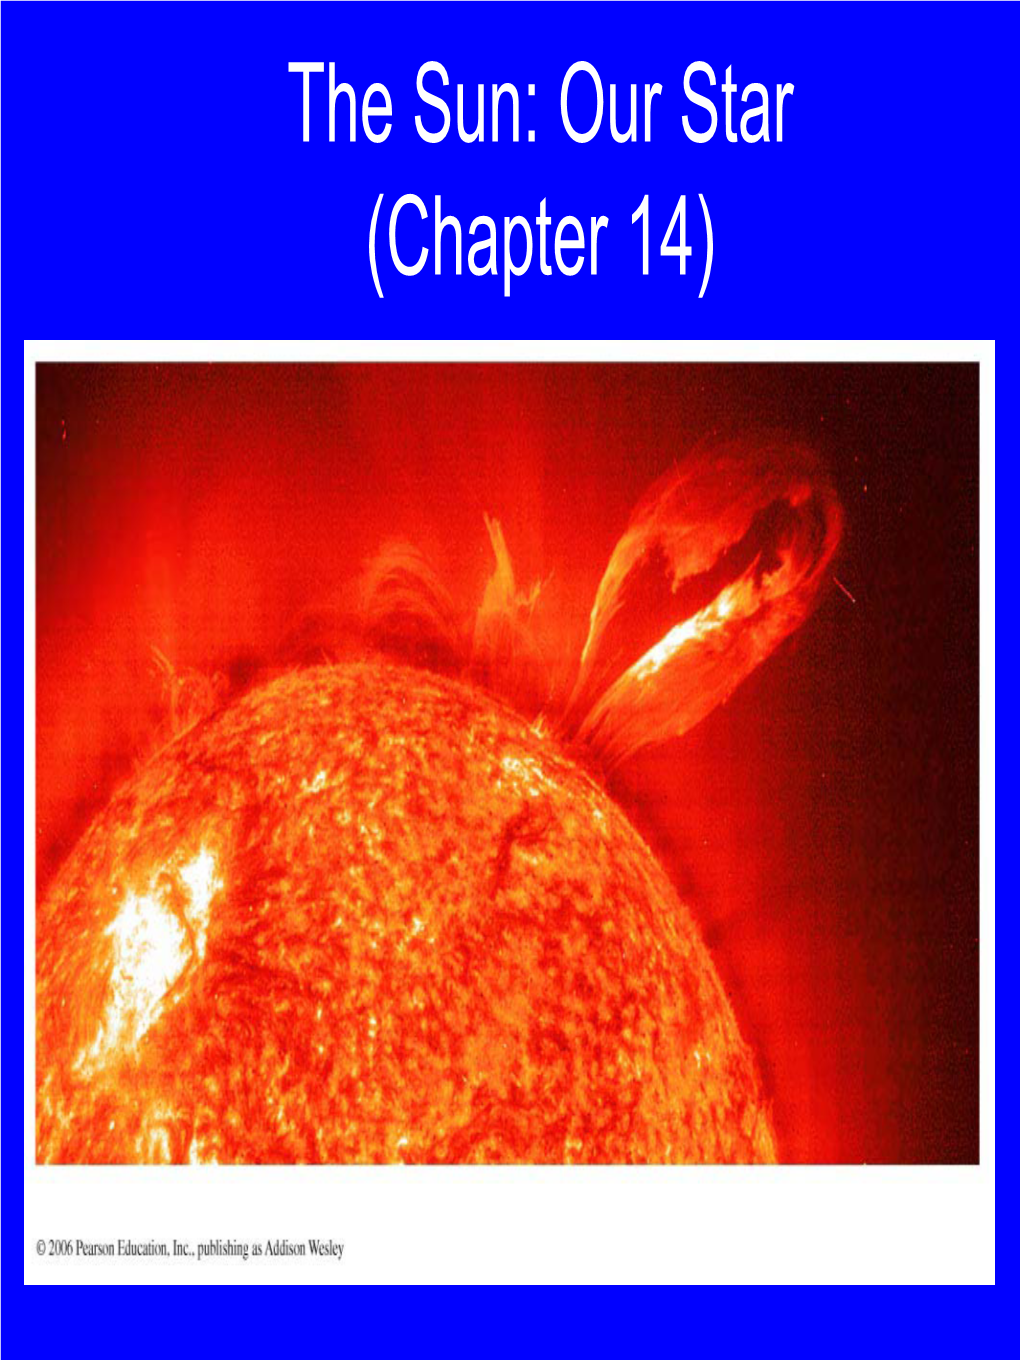 The Sun: Our Star (Chapter 14) Based on Chapter 14